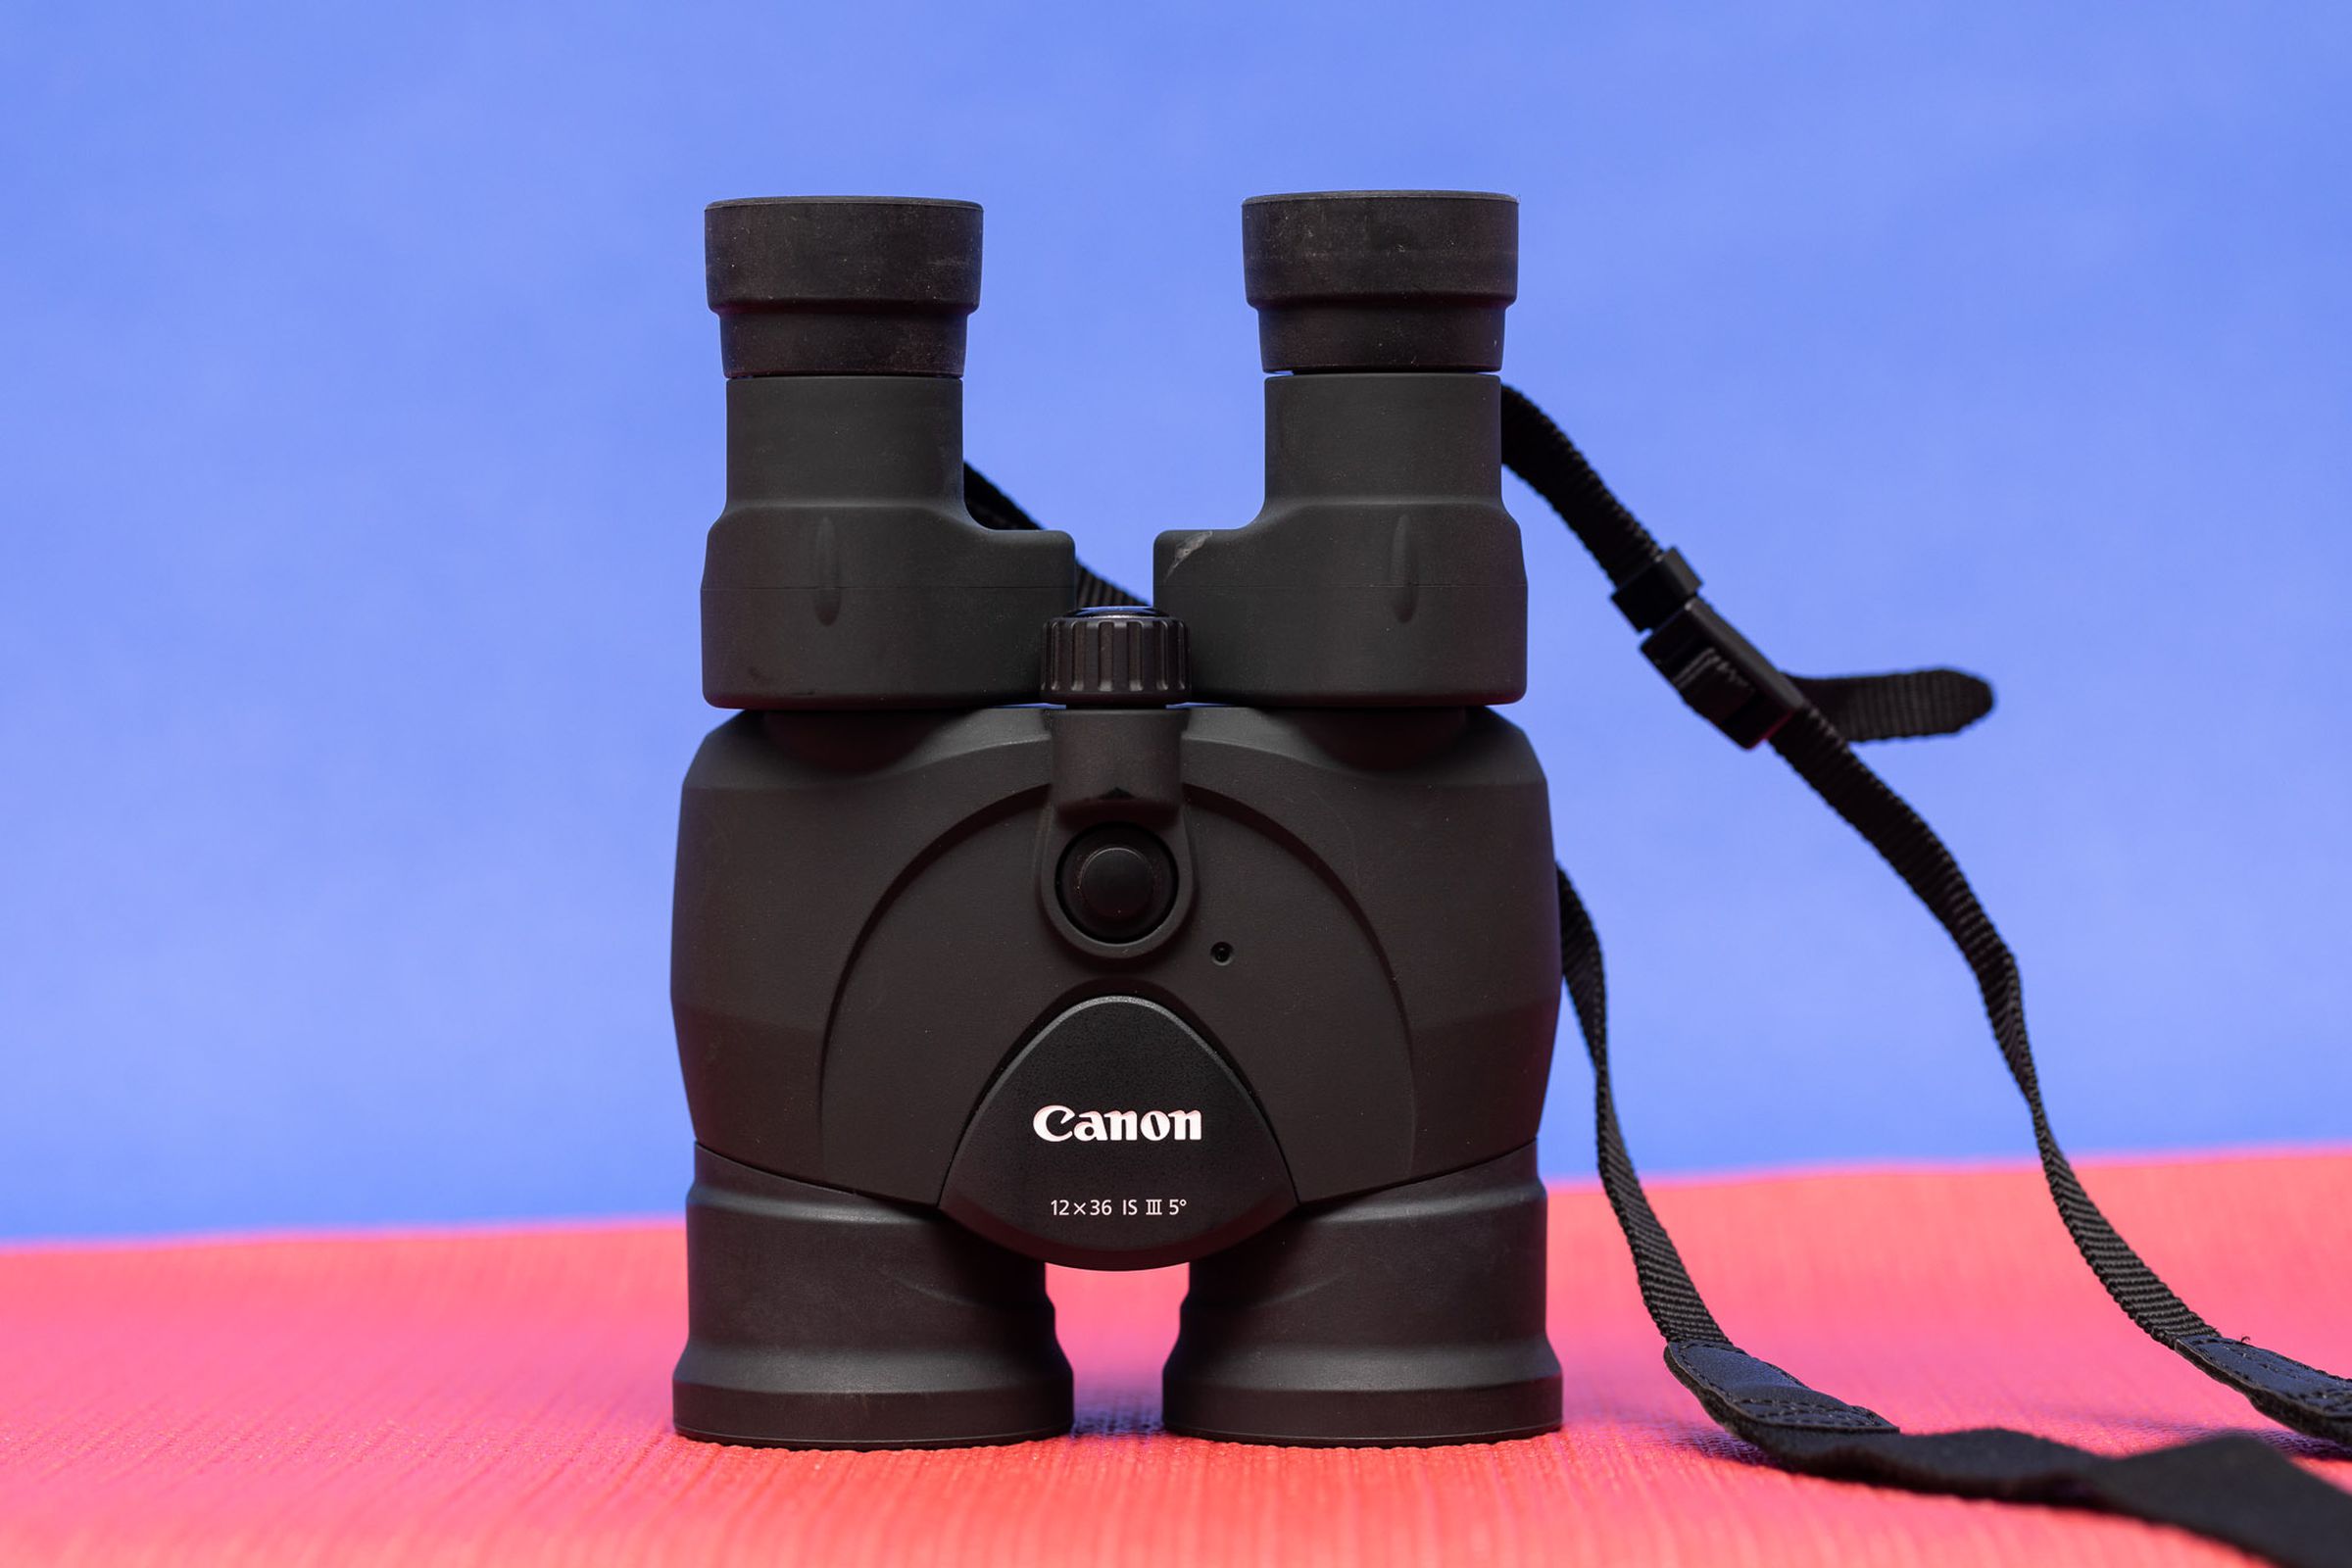 The binoculars come in many different magnifications, from 8x to 18x, and with varying grades of glass.